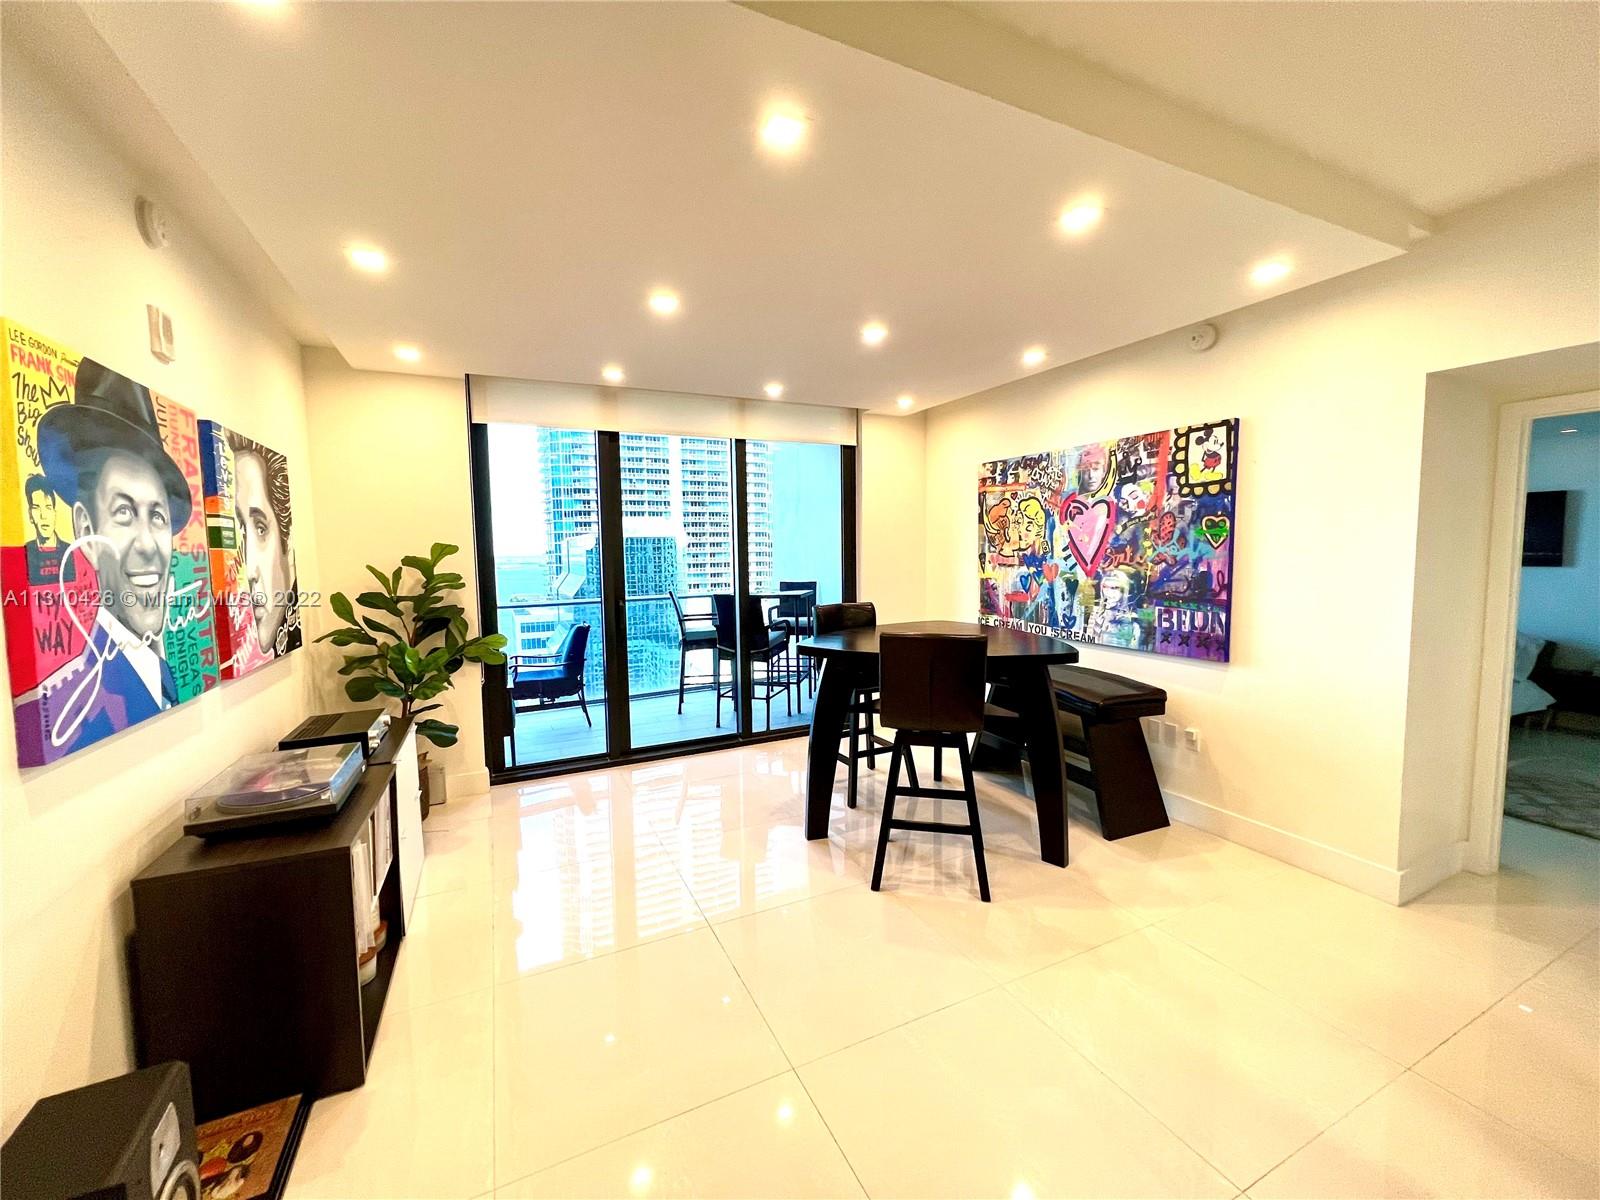 Stunning 2 bedrooms + spacious DEN + family room / 3 full bathrooms in the prestigious 1010 Brickell. Upgraded unit with private elevator, built in closets and shades, dropdown ceilings in living room, modern bathrooms and kitchen with top-of-the-line appliances and cabinetry. Expansive balcony with direct access from living room and both bedrooms, with gorgeous bay and city views.
1010 Brickell building offers resort style amenities: indoor heated pool, running track, squash and indoor basketball court, arcade and bowling room, rooftop pool with sundeck, BBQ area and bar, spa, fitness room, theater and community room.